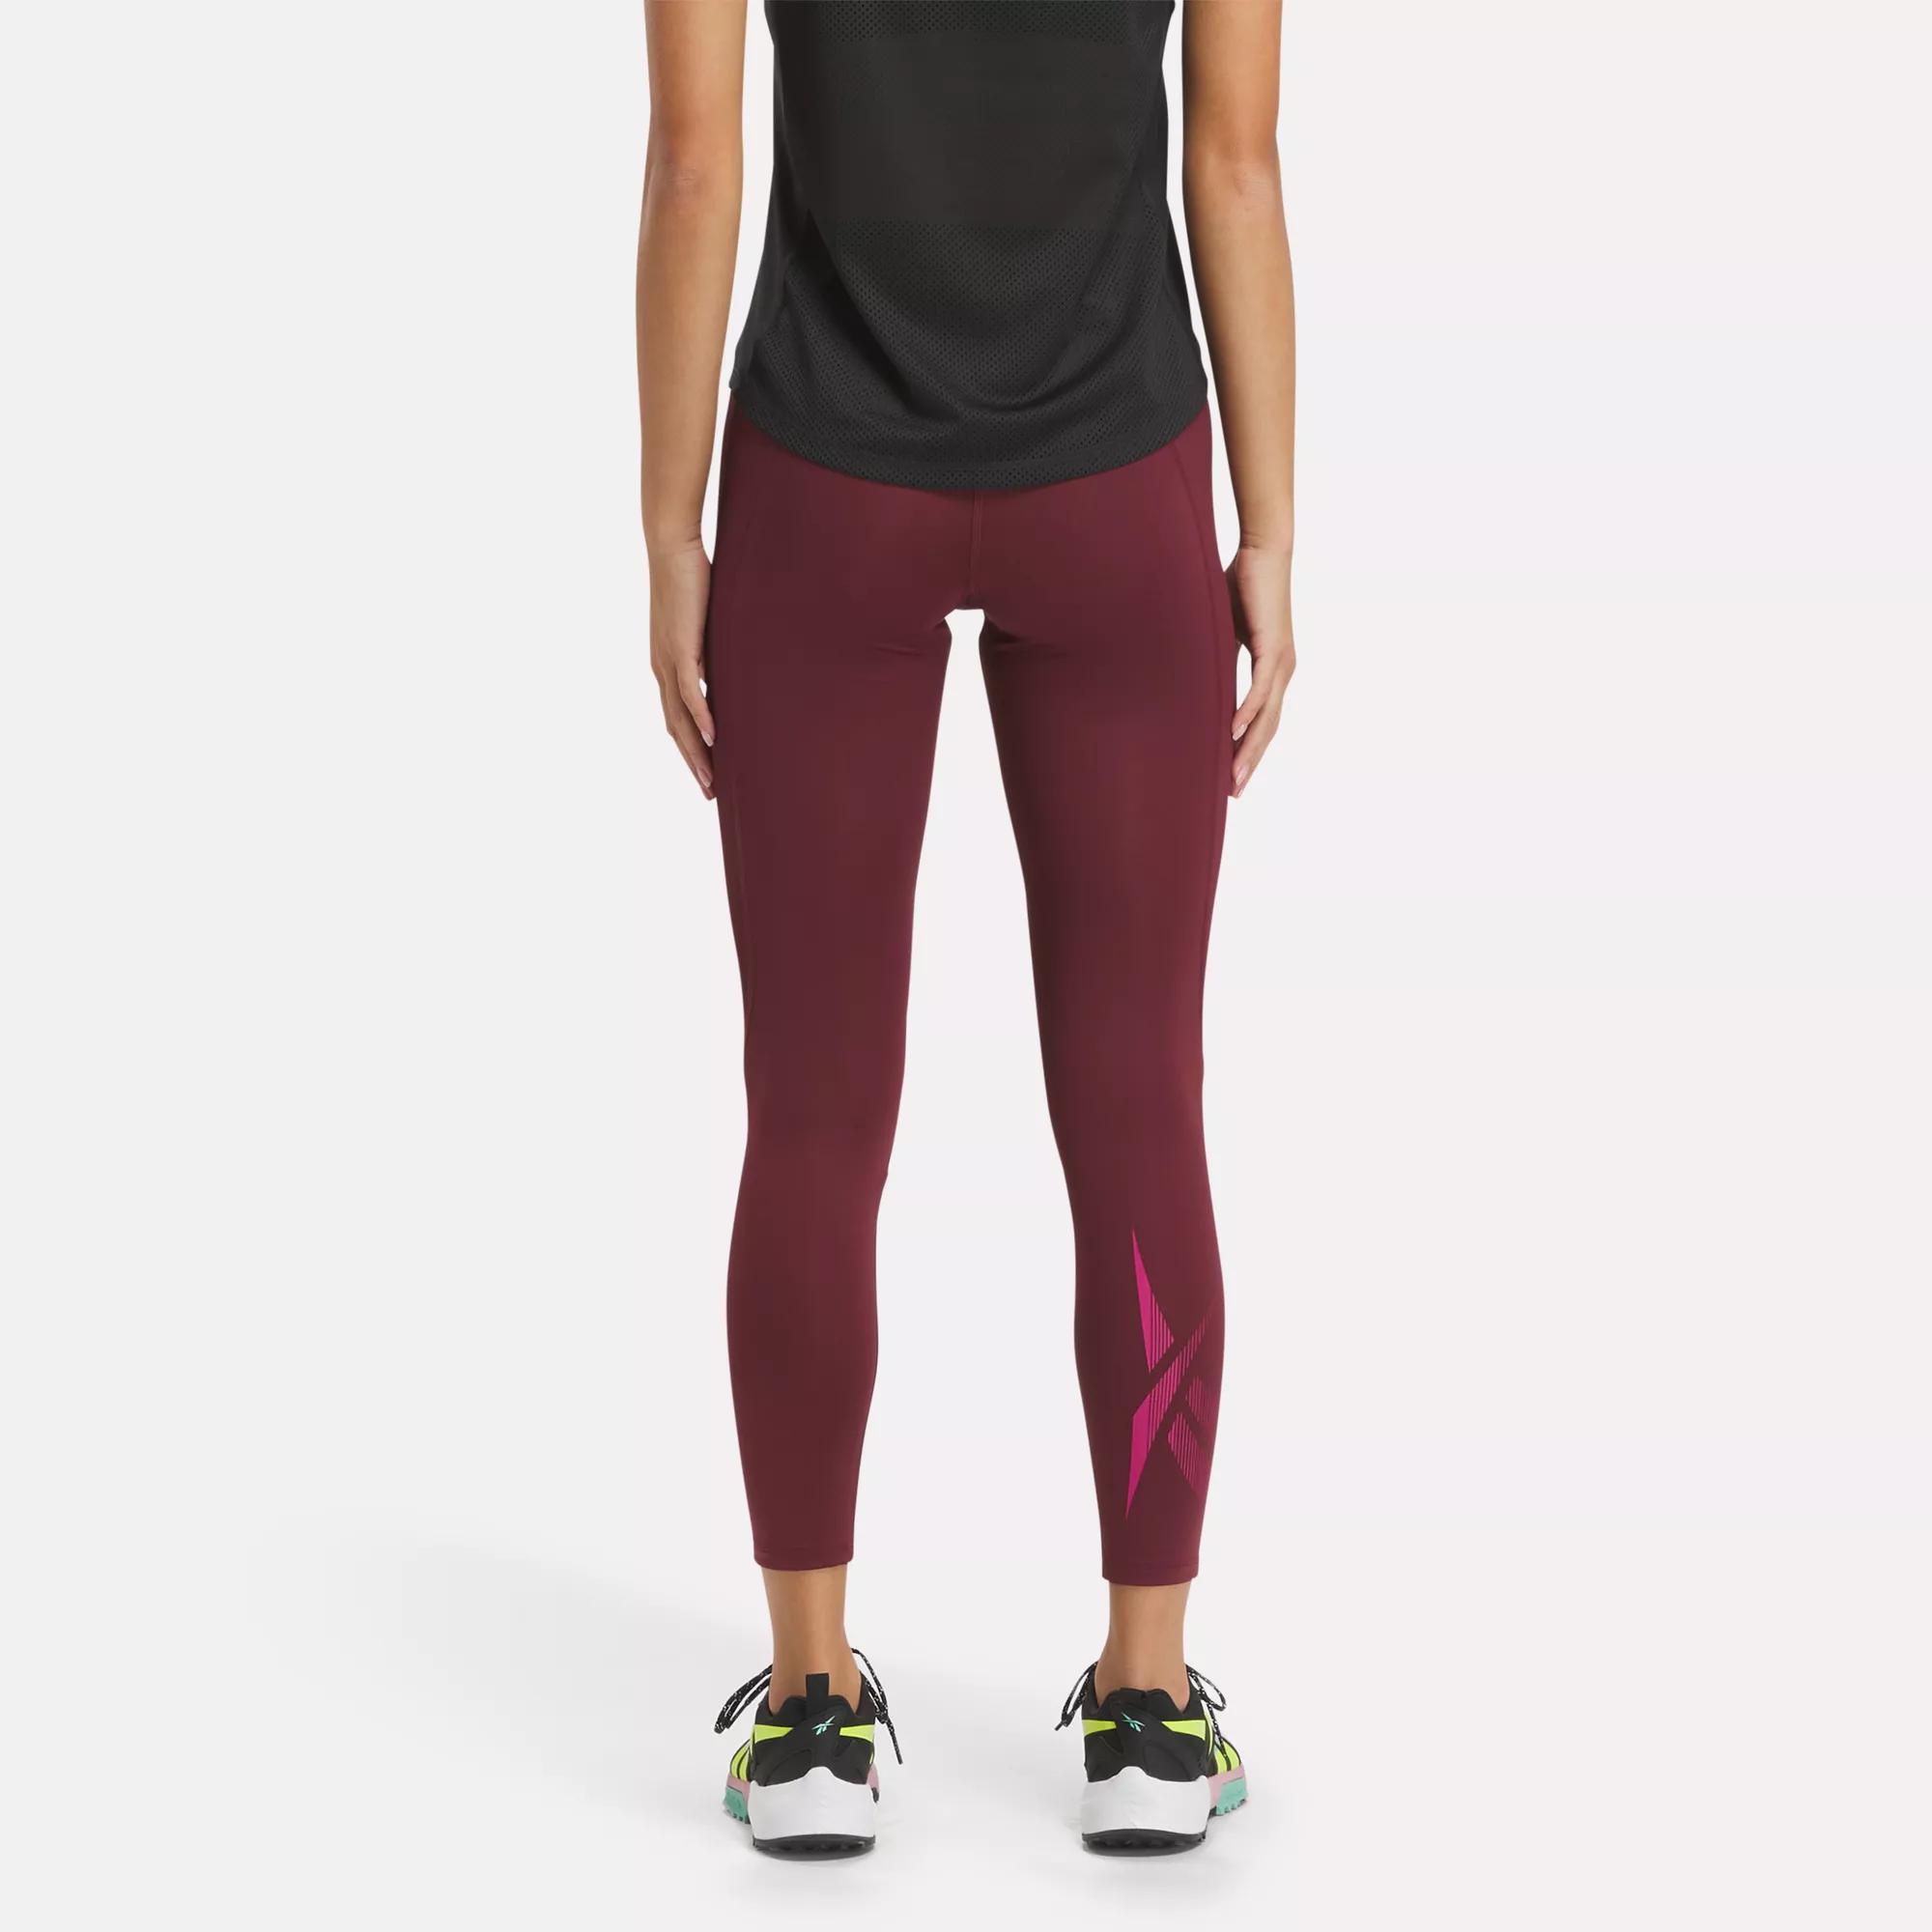 Buy a Reebok Womens Run Essentials Tight Compression Athletic Pants